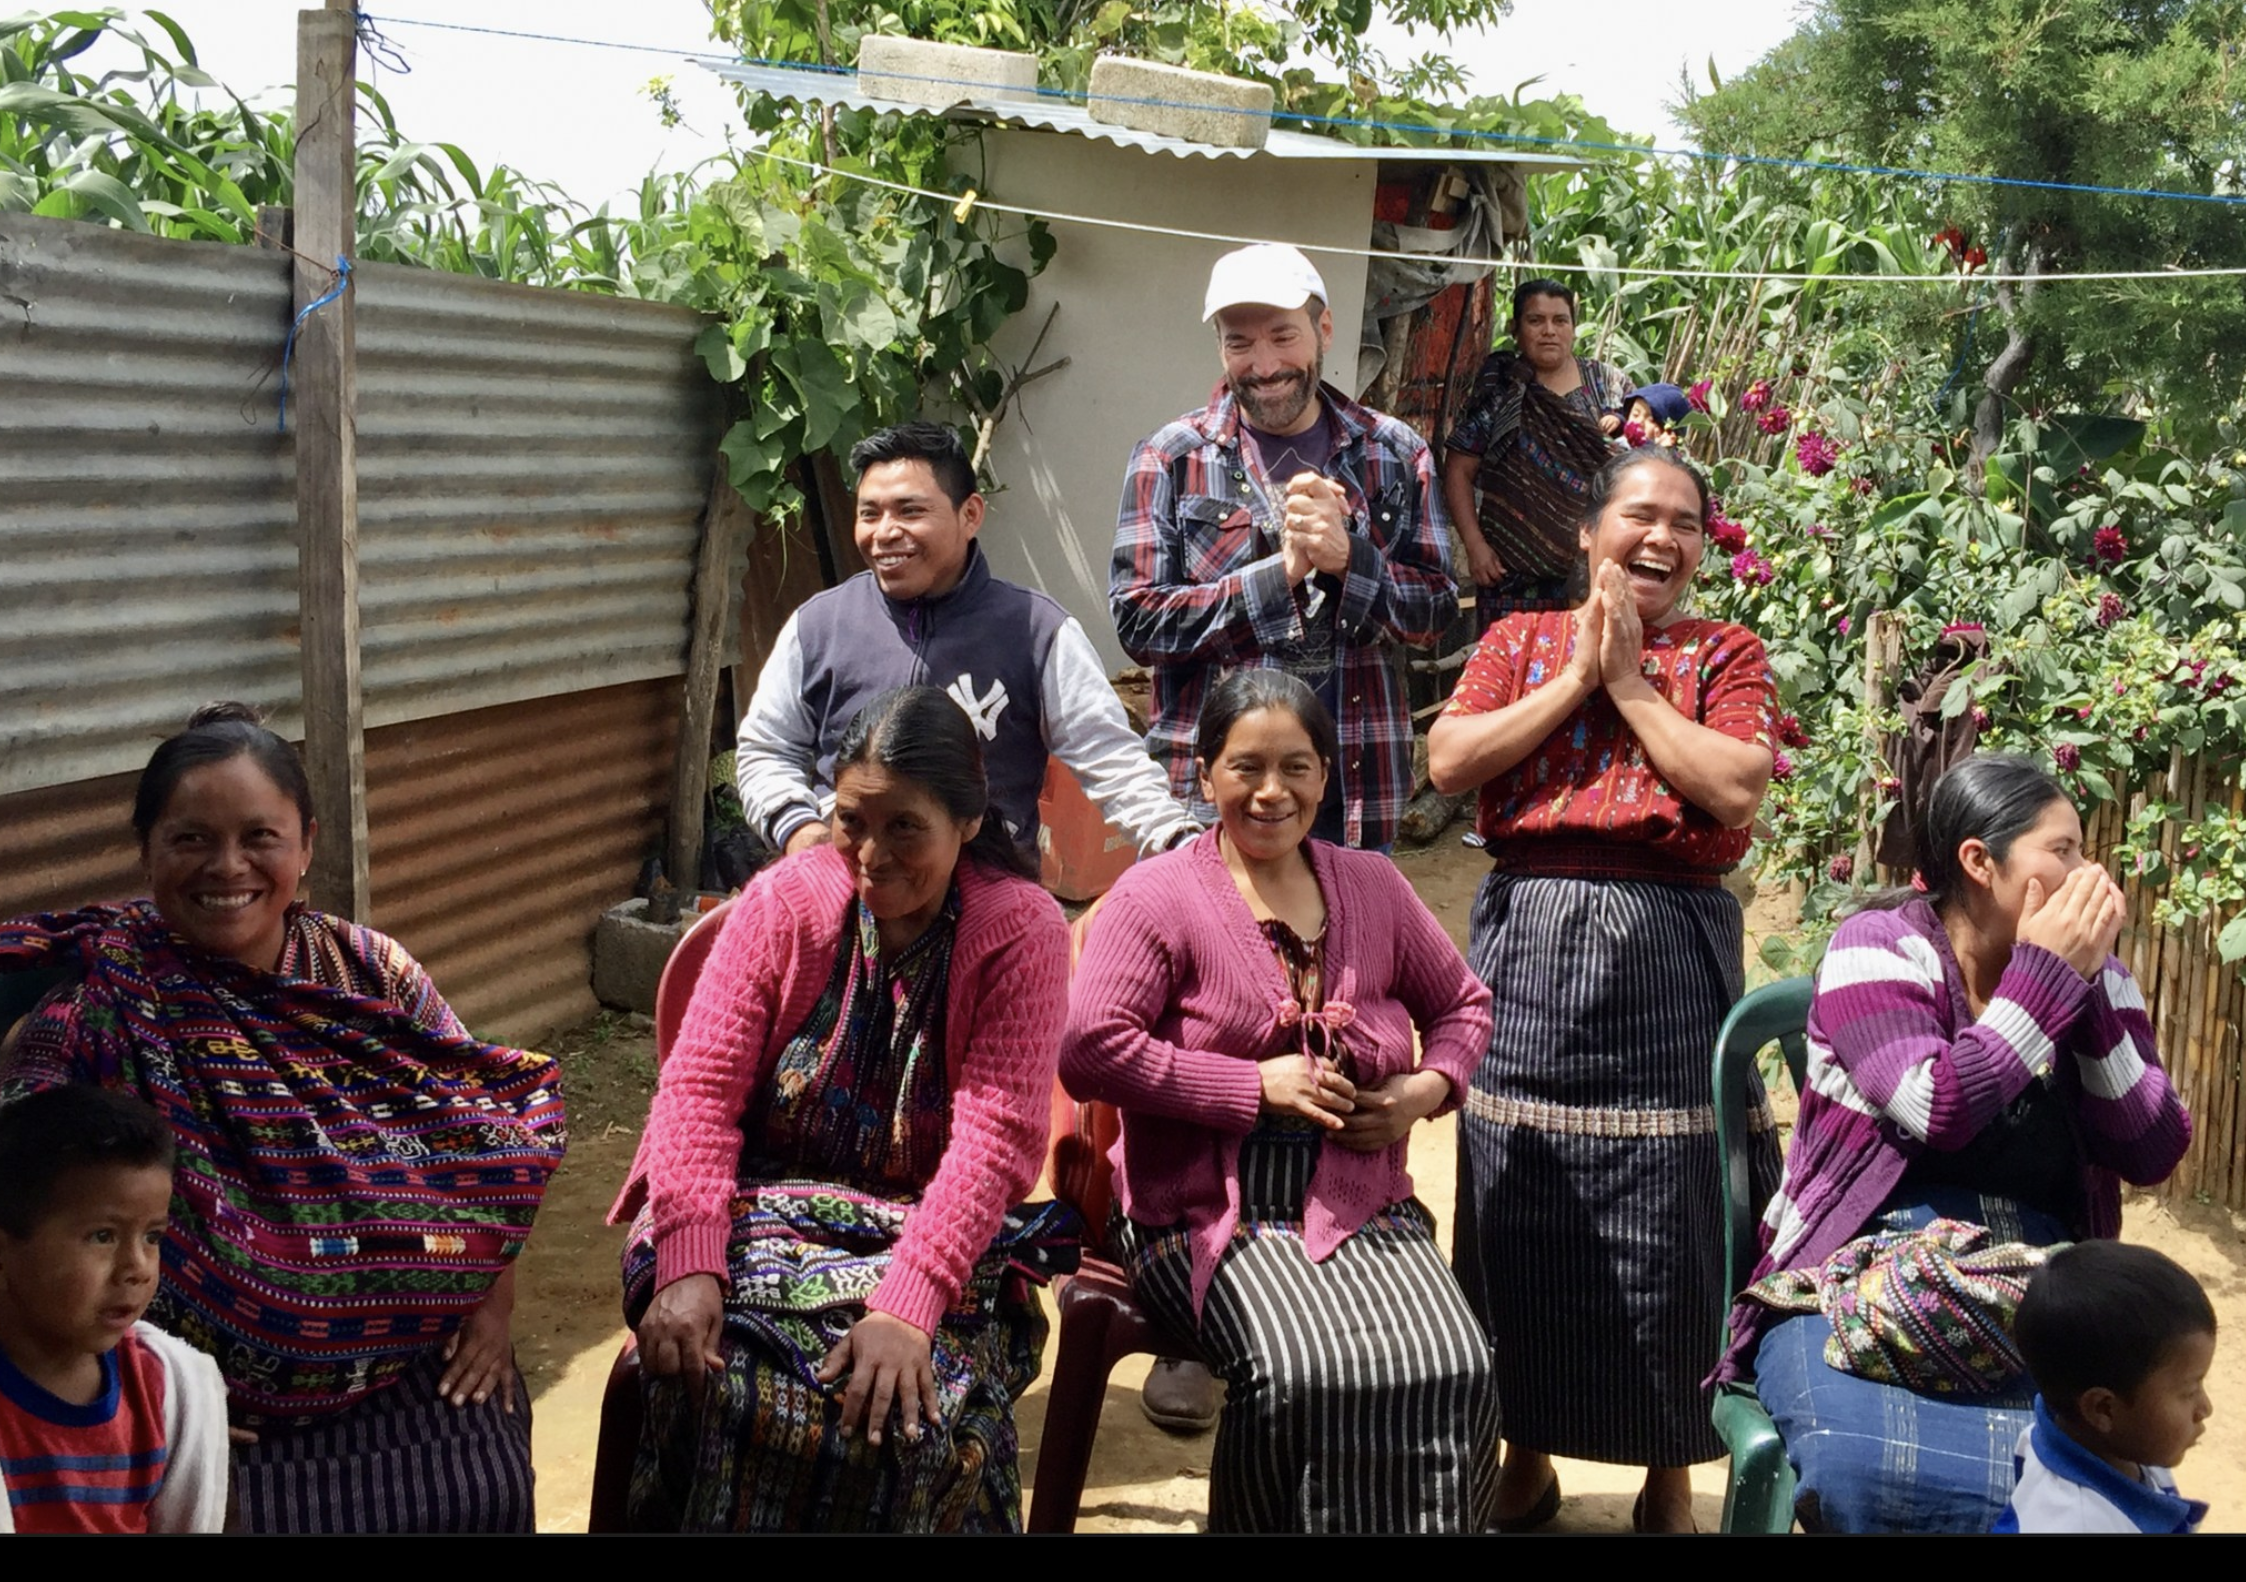 Local village women in Guatemala so happy to be receiving  much-needed water filters!